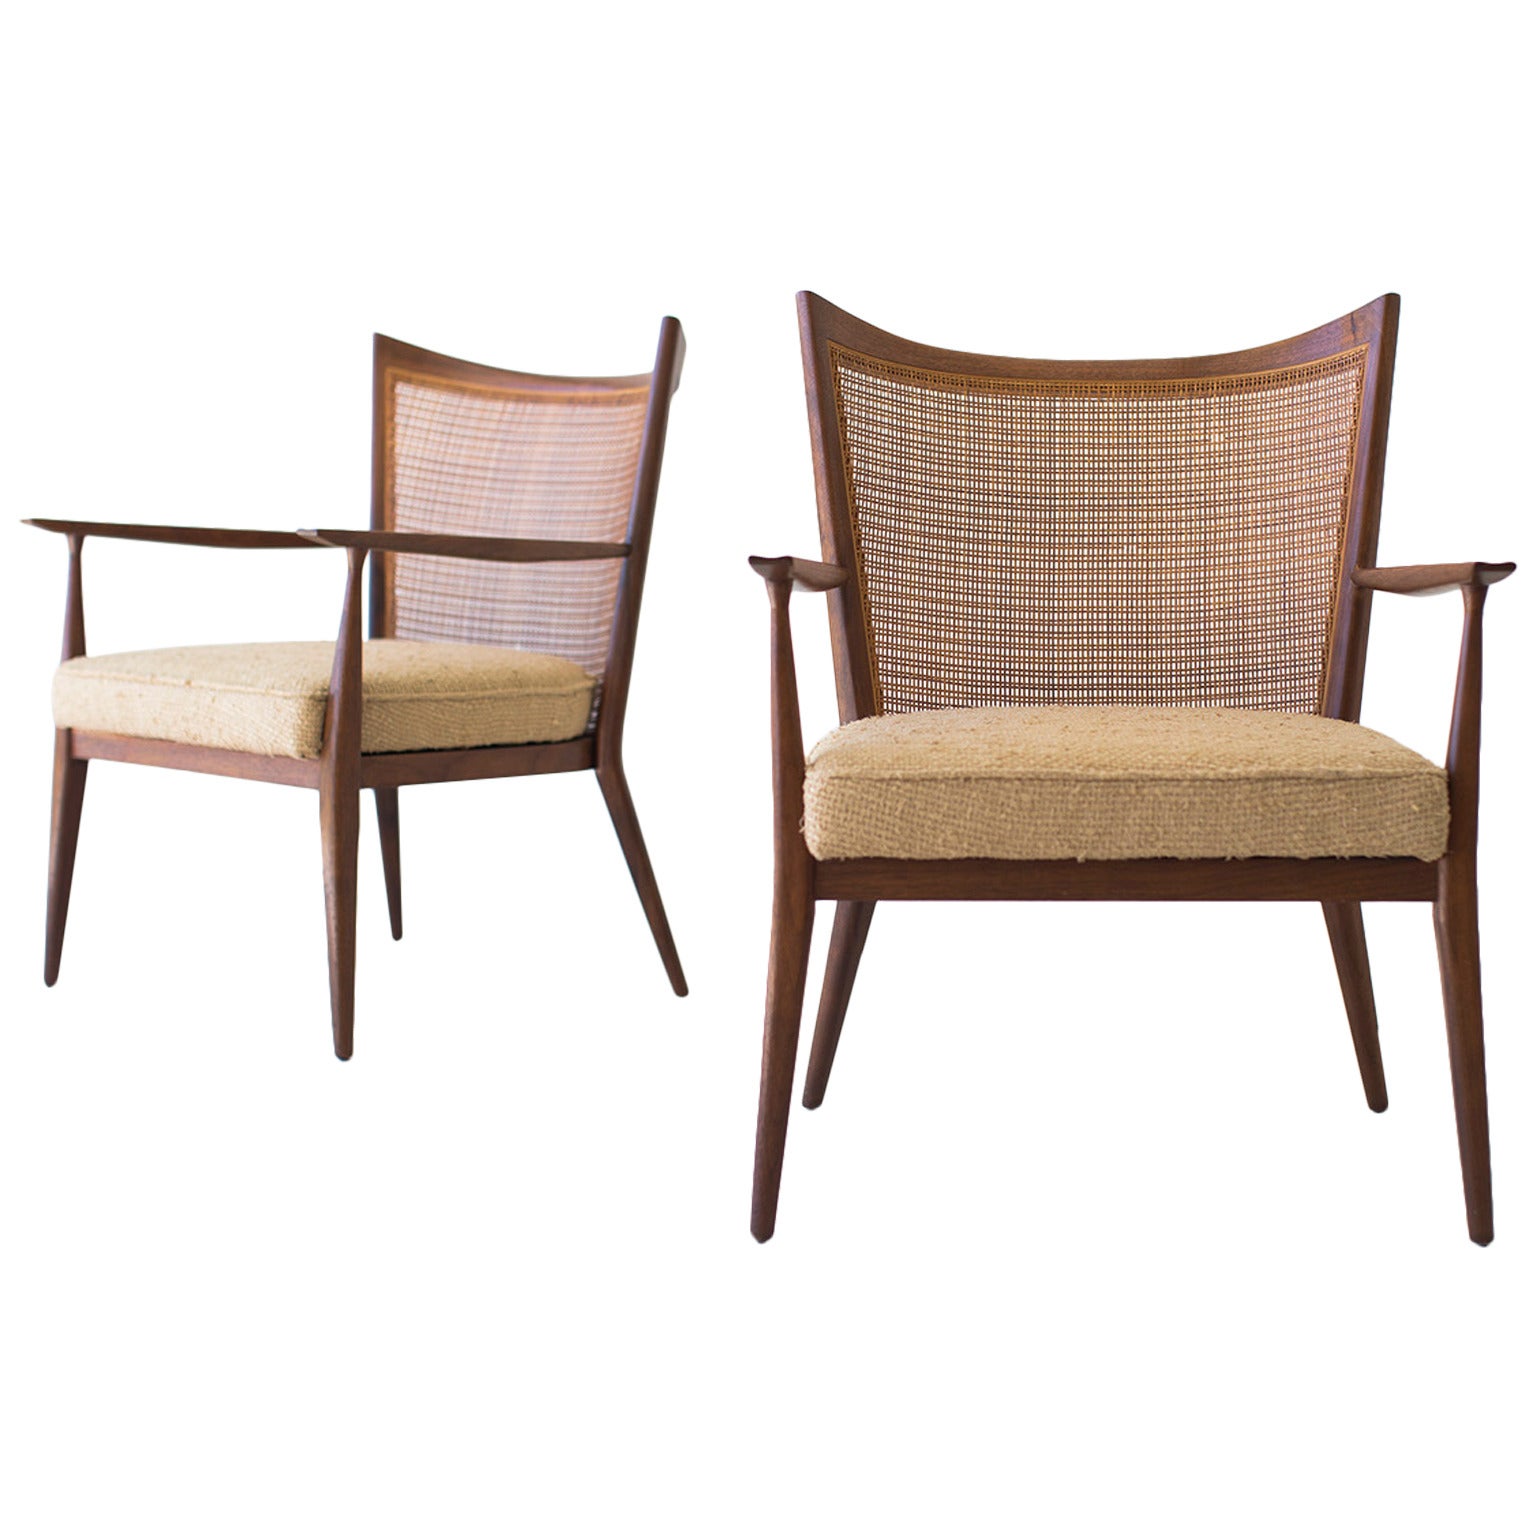 Paul McCobb Lounge Chairs for Directional